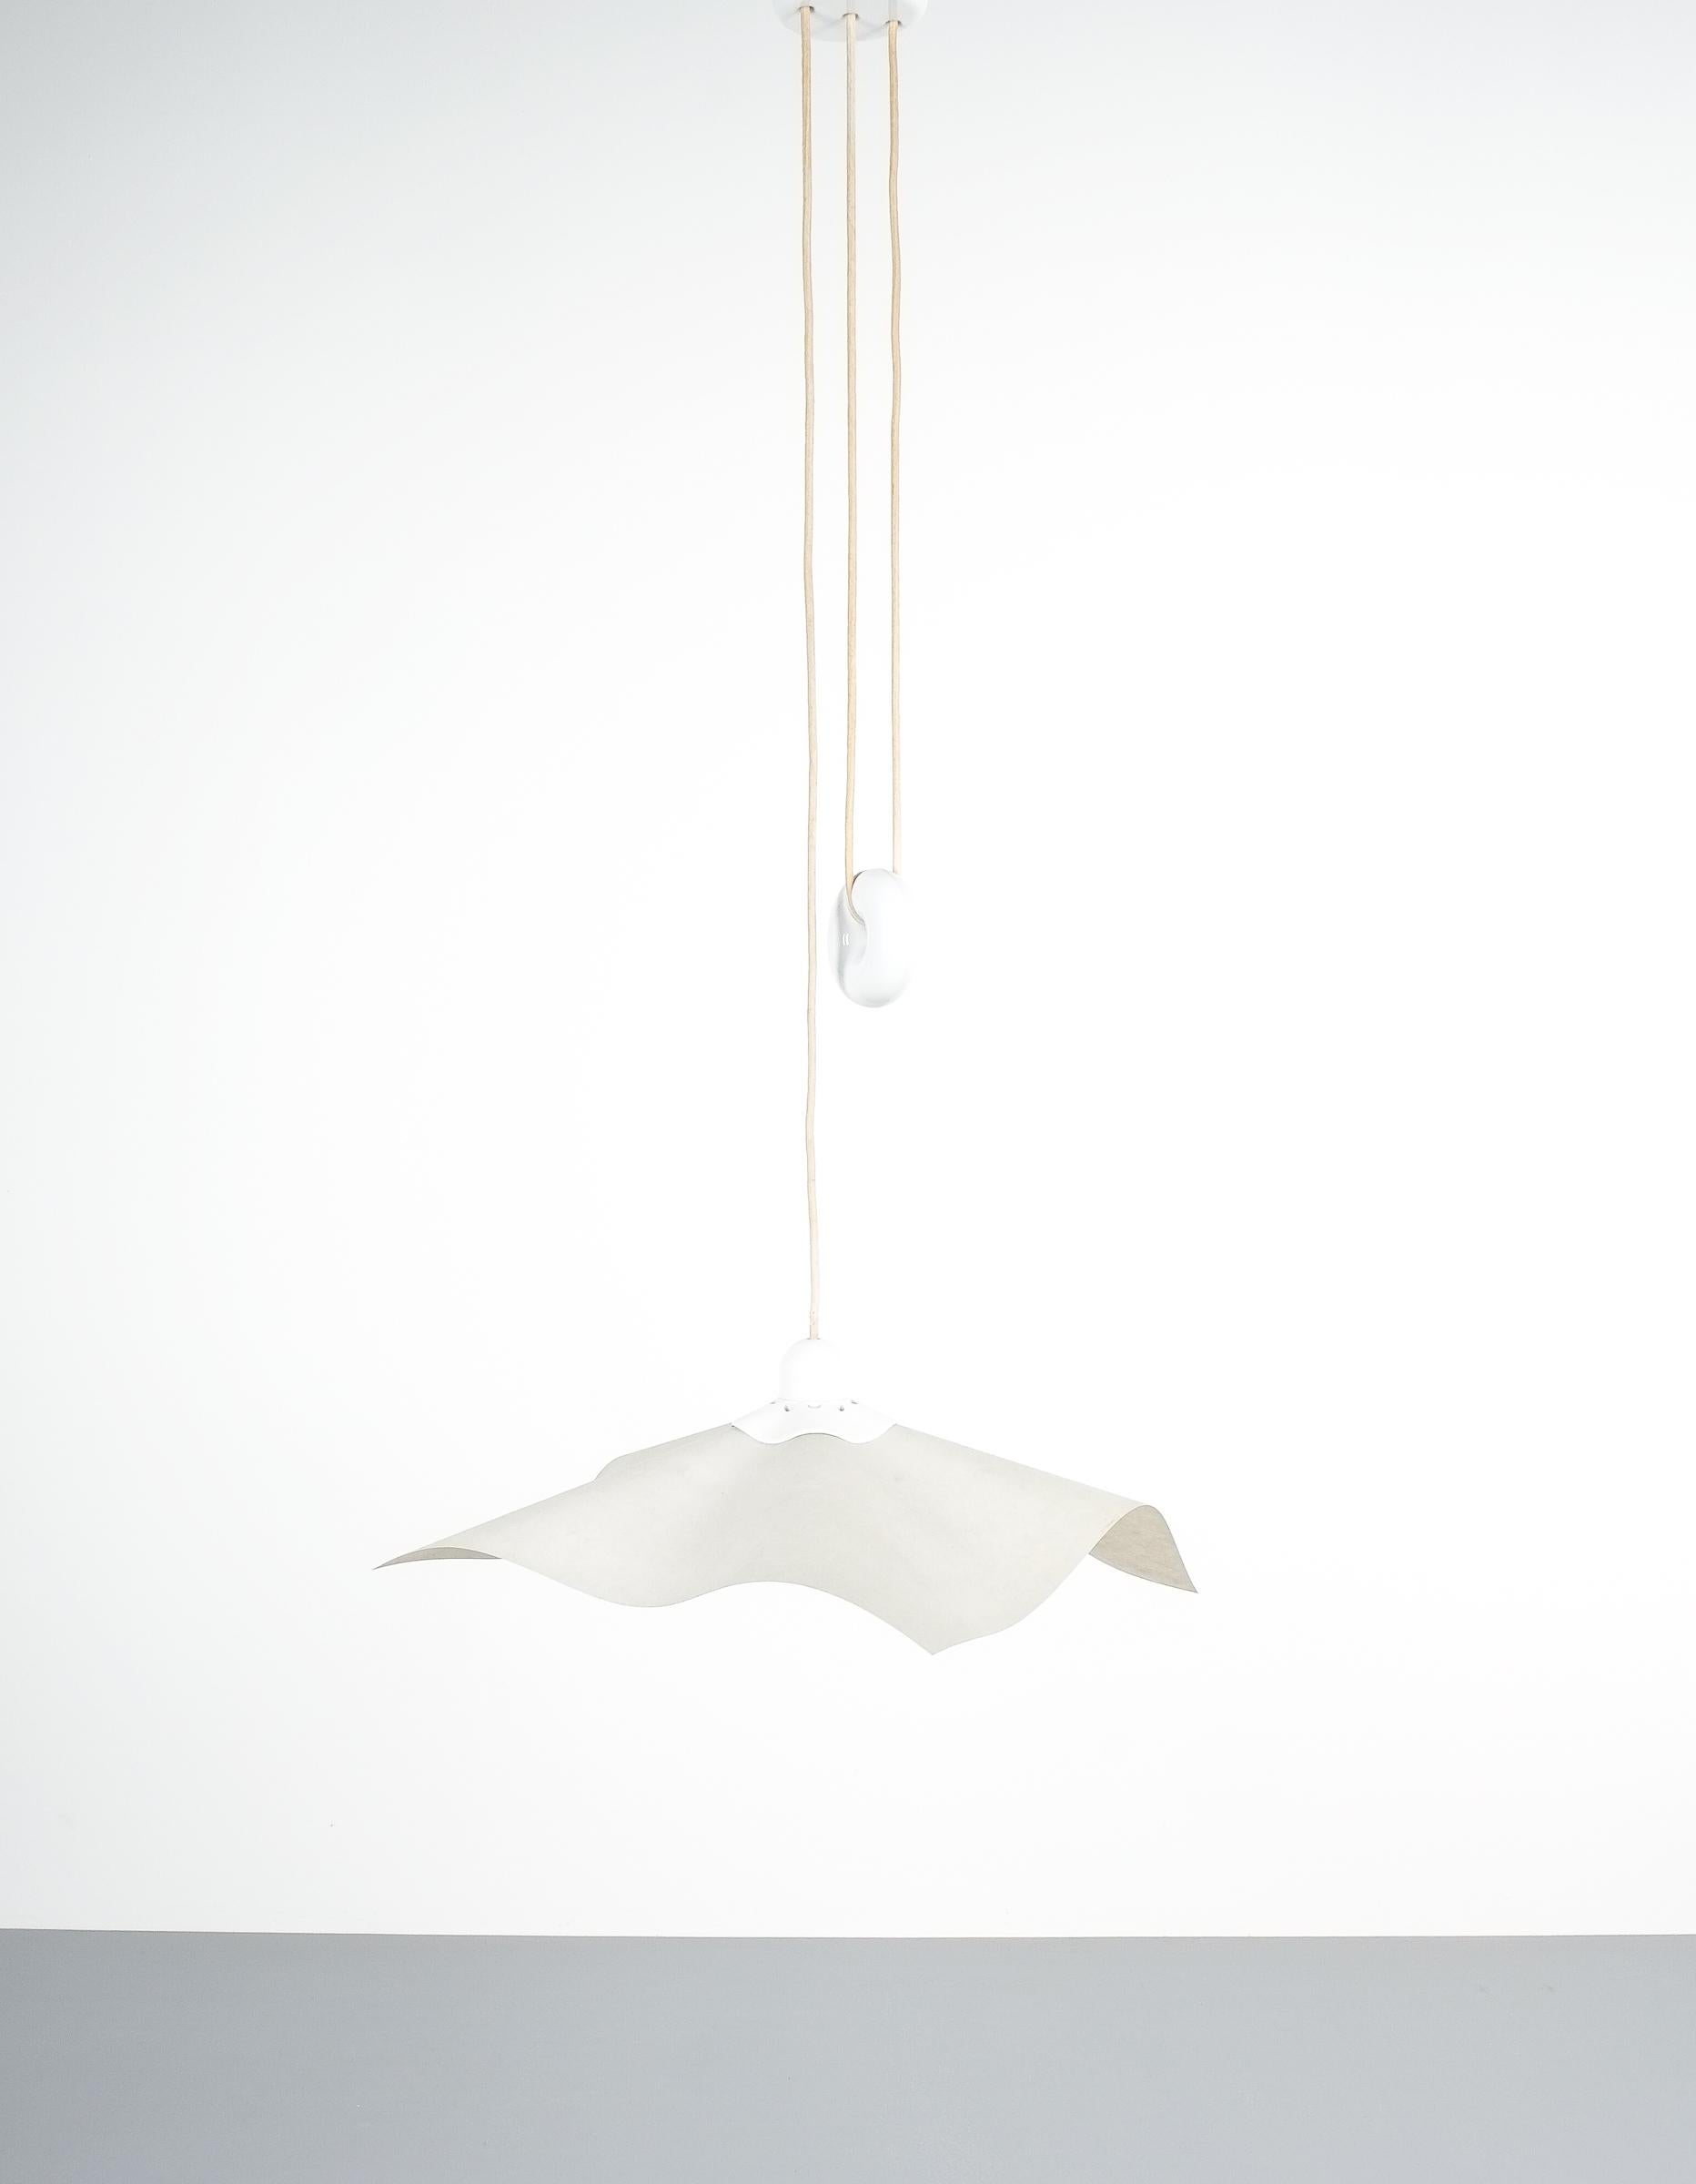 Mario Bellini Counterweight Pendant Lamp Area 50 by Artemide, Italy, 1976 For Sale 3